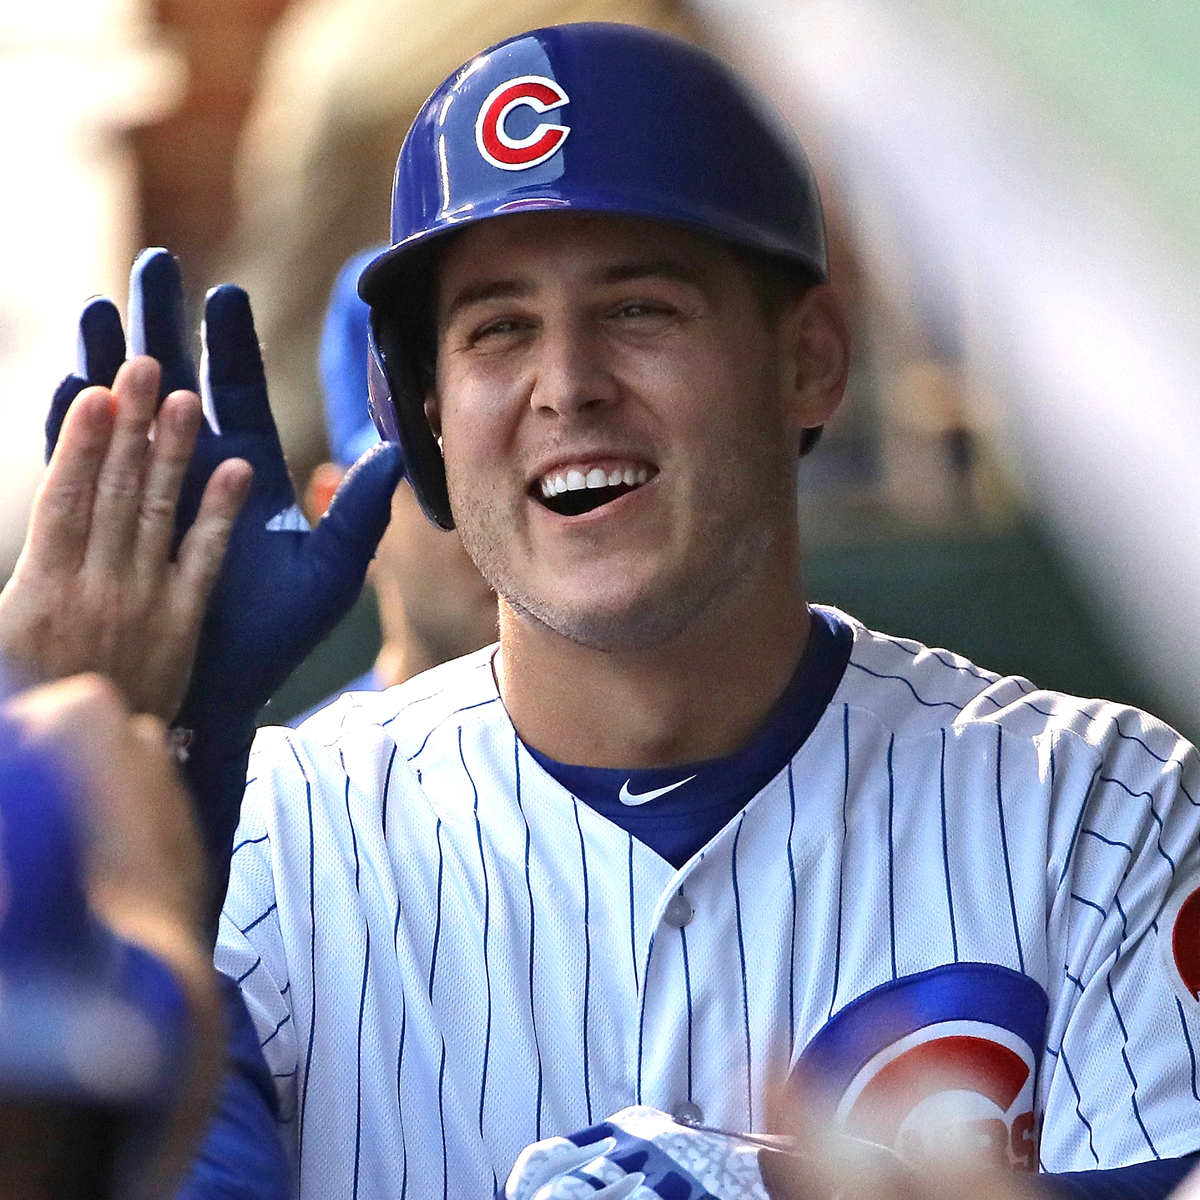 Cubs first baseman Anthony Rizzo, a cancer survivor, says he's comfortable  playing amid the pandemic